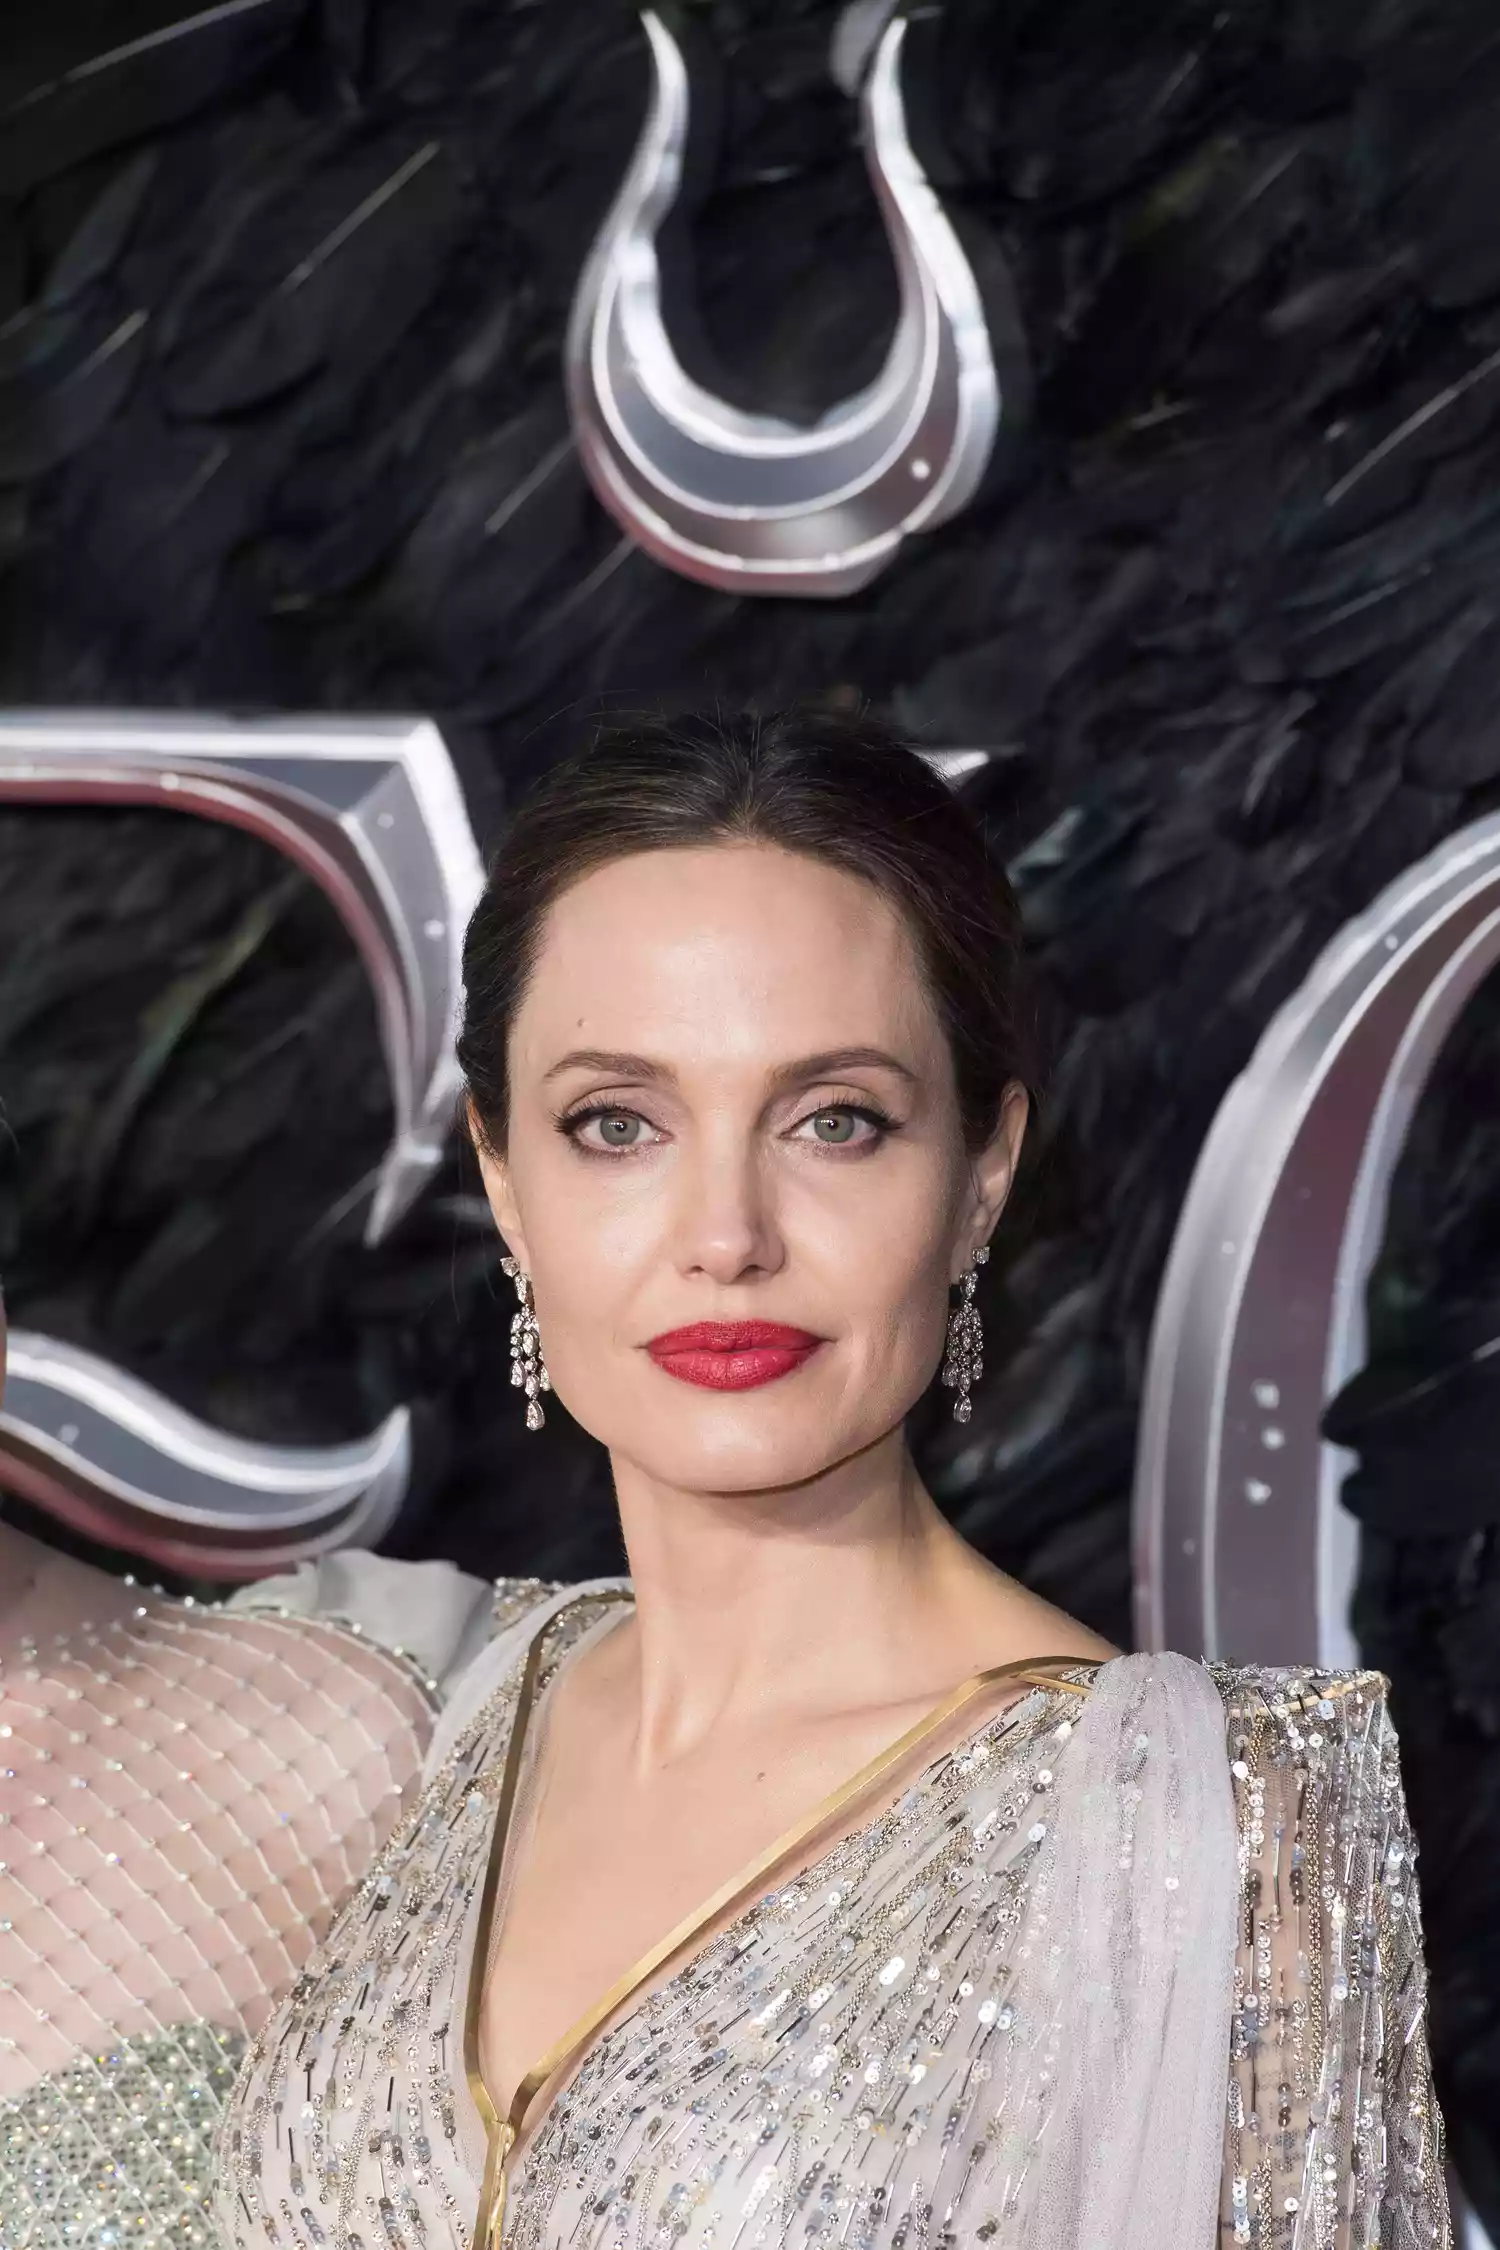 Angelina Jolie on the red carpet at the European premiere of Malificent